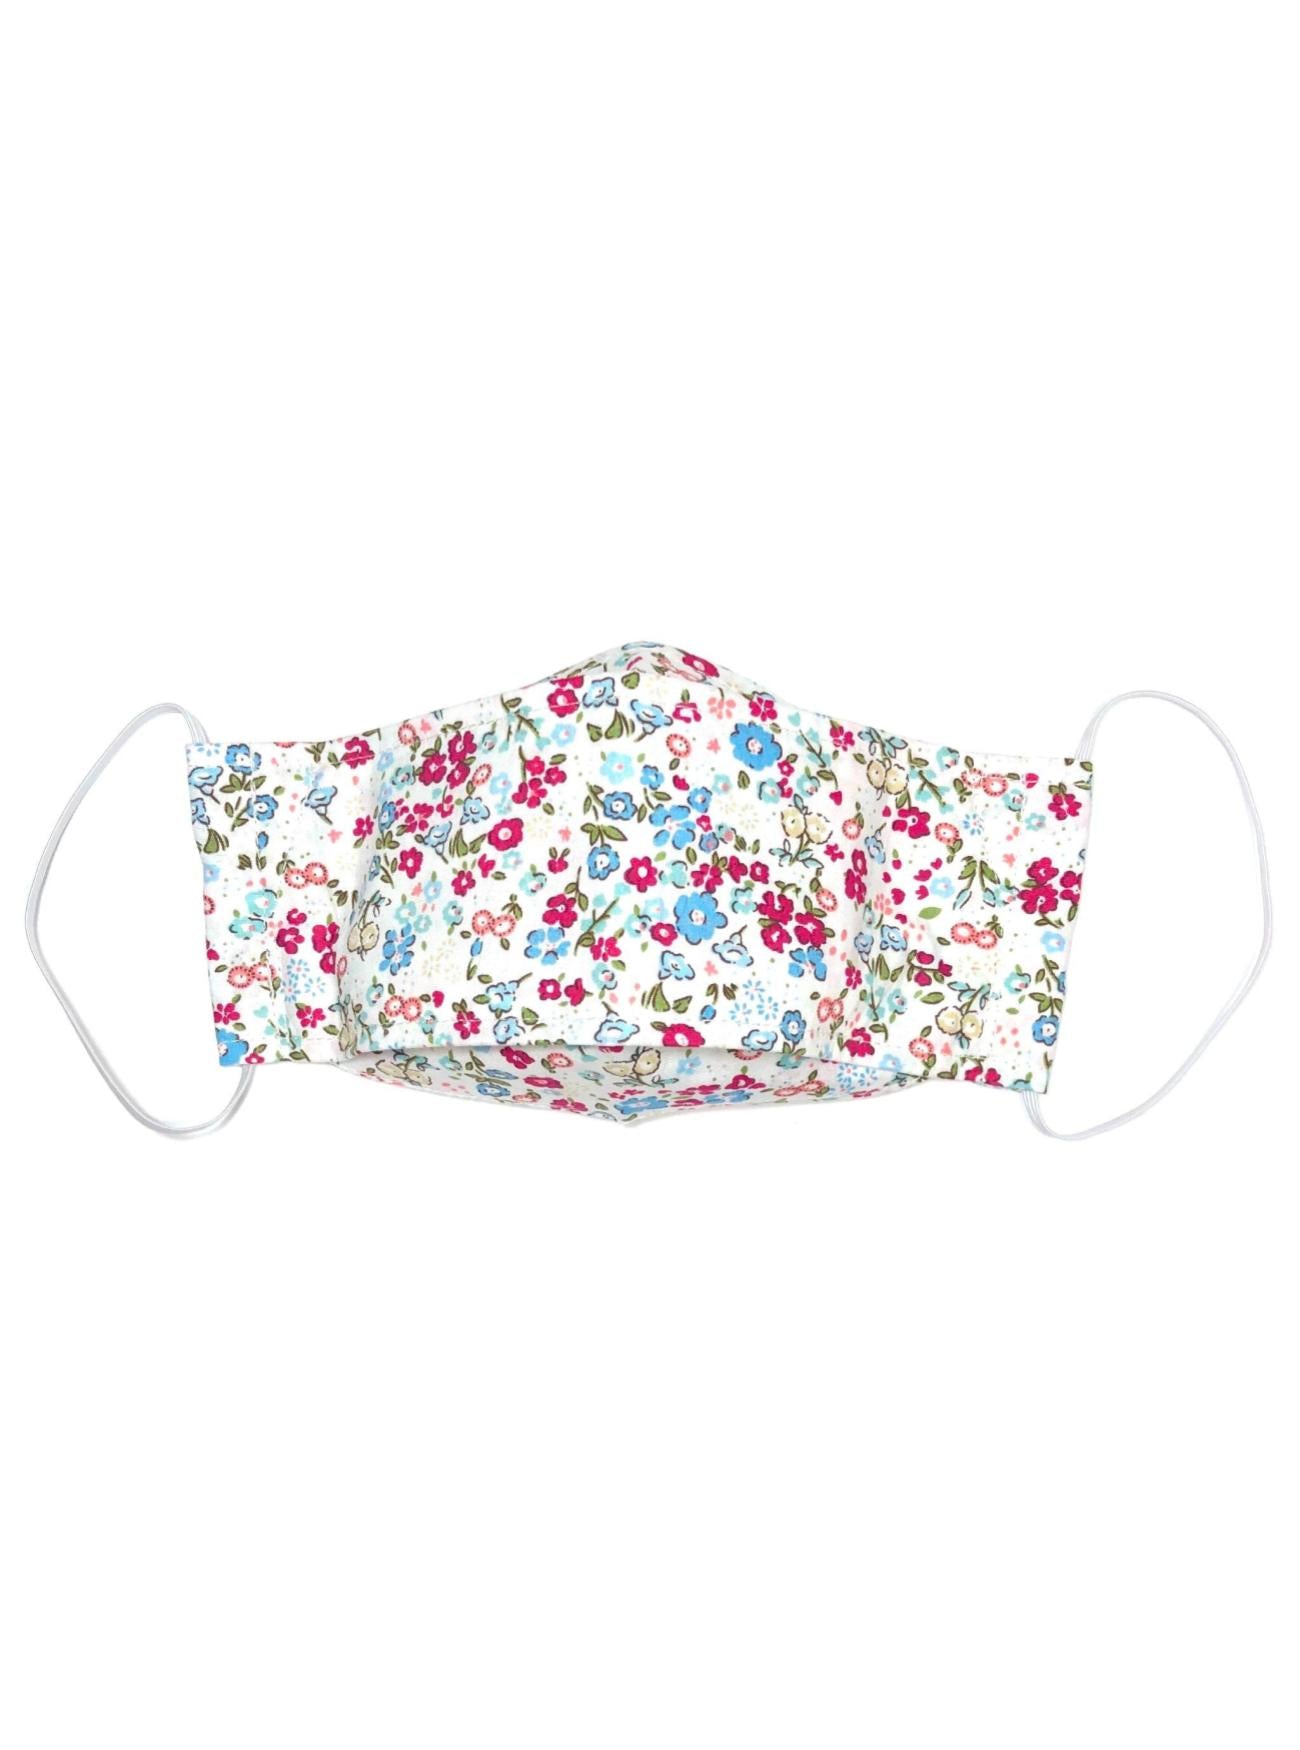 Funky Floral,Reusable Face Mask [2-layers]